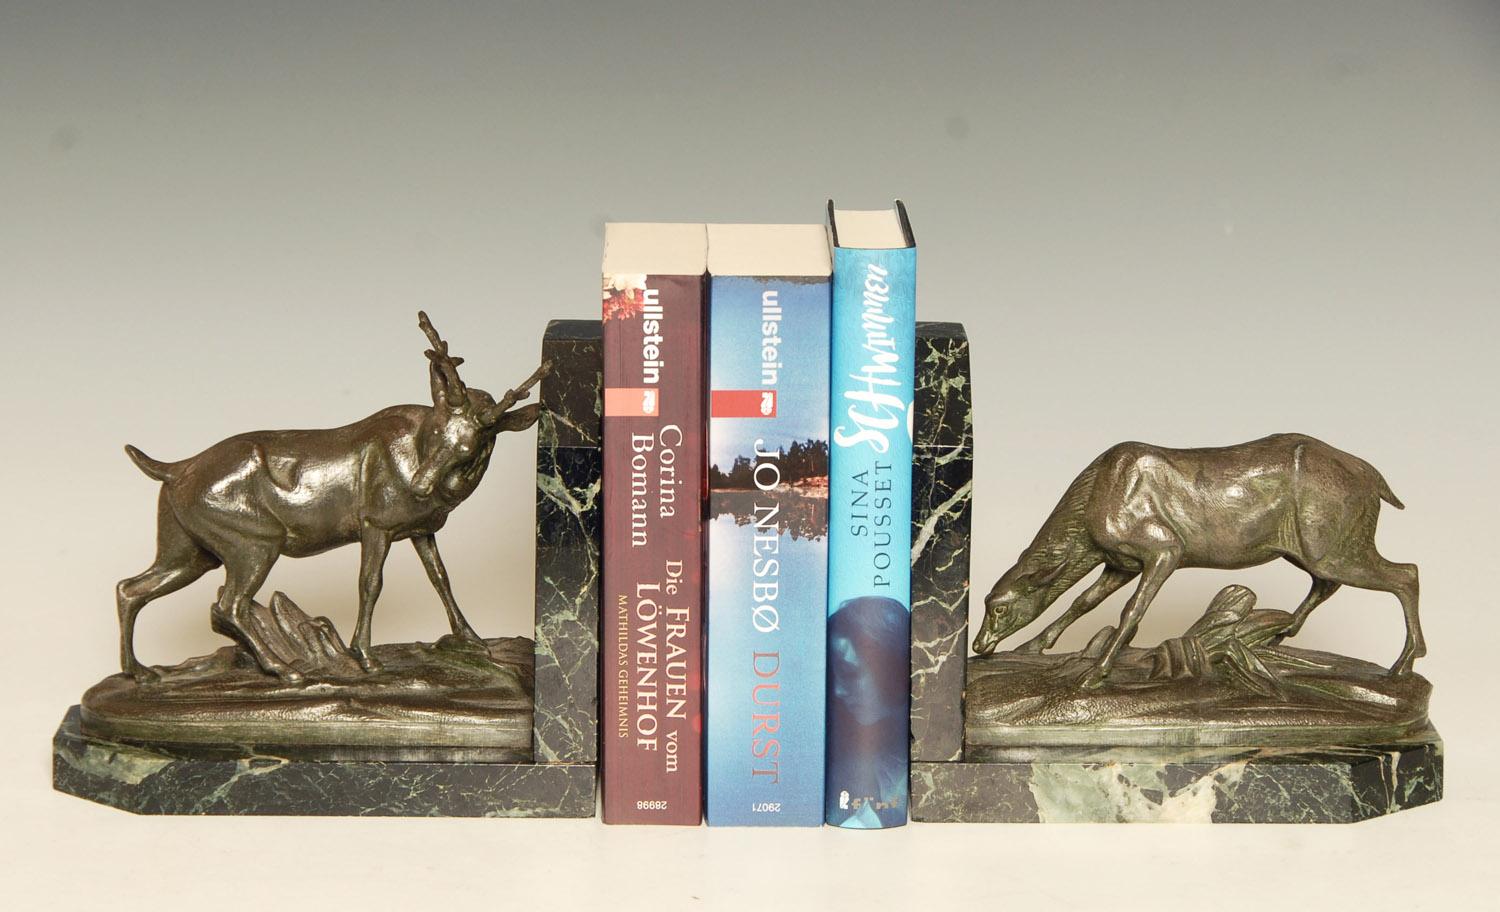 Fabulous pair of original Art Deco bookends of a stag and his mate, patinated metal on green variegated marble bases.

Large heavy pieces weighing around 5 lb or 2.25 kilos each.

Price includes complimentary shipping to anywhere in the world.